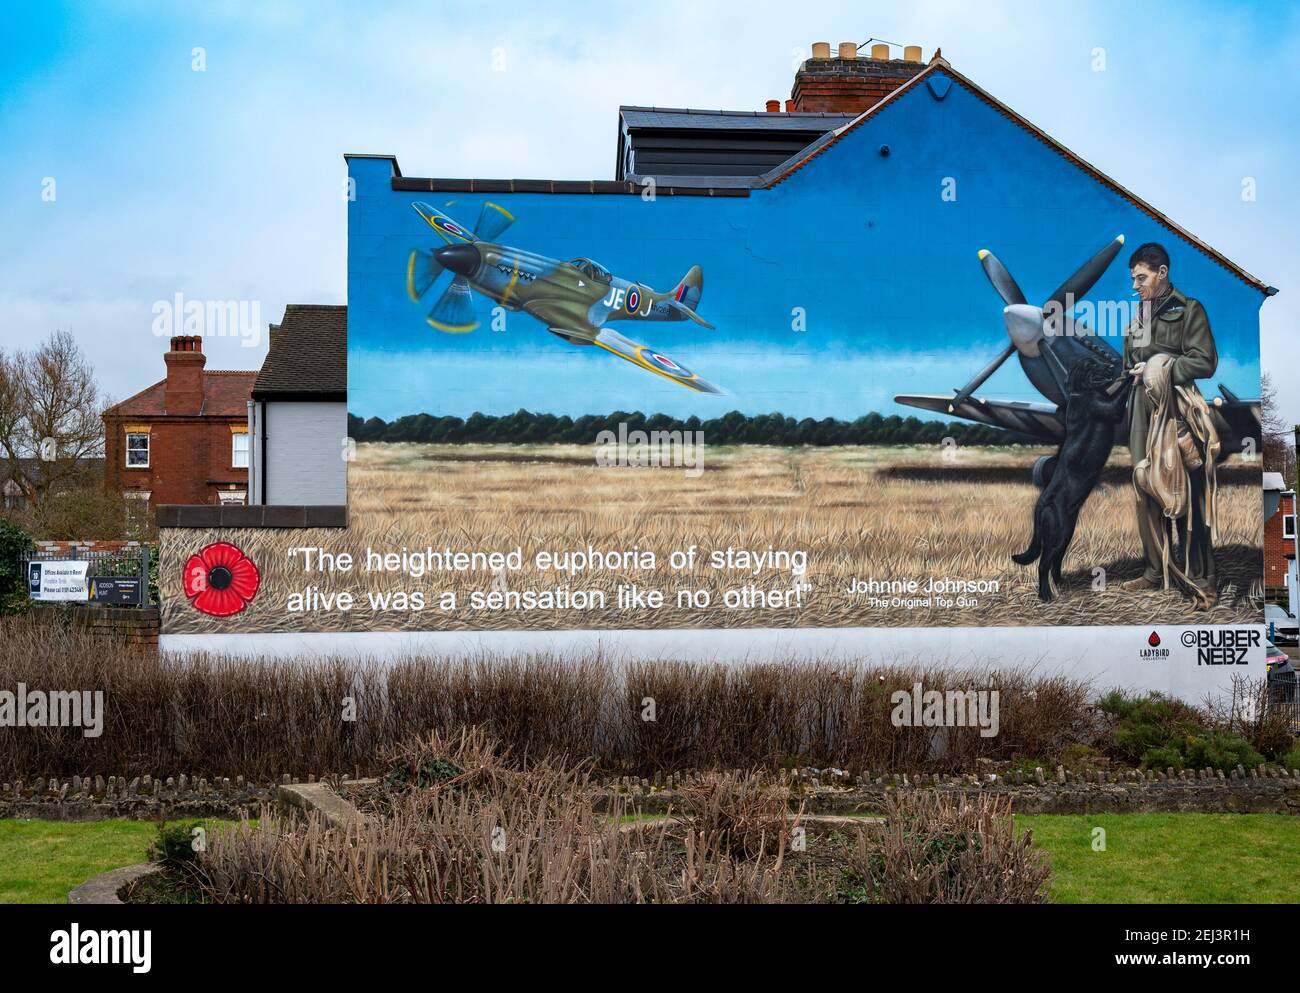 Loughborough, Leicestershire, UK. 21st February 2021.  A mural on the side of a building in Loughborough portrays the legendary Air Vice Marshal James Edgar ‘Johnnie’ Johnson, who was born locally.   The artwork pays tribute to the Second World War RAF Spitfire pilot, better known as Johnnie Johnson, who shot down more enemy aircraft than any other Allied fighter pilot during the war, flying some 700 operational sorties.   Painted by Buber Nebz, the mural is part of The Ladybird Collective, which is behind several artworks appearing in Loughborough.  Credit: Matt Limb/Alamy Live News Stock Photo